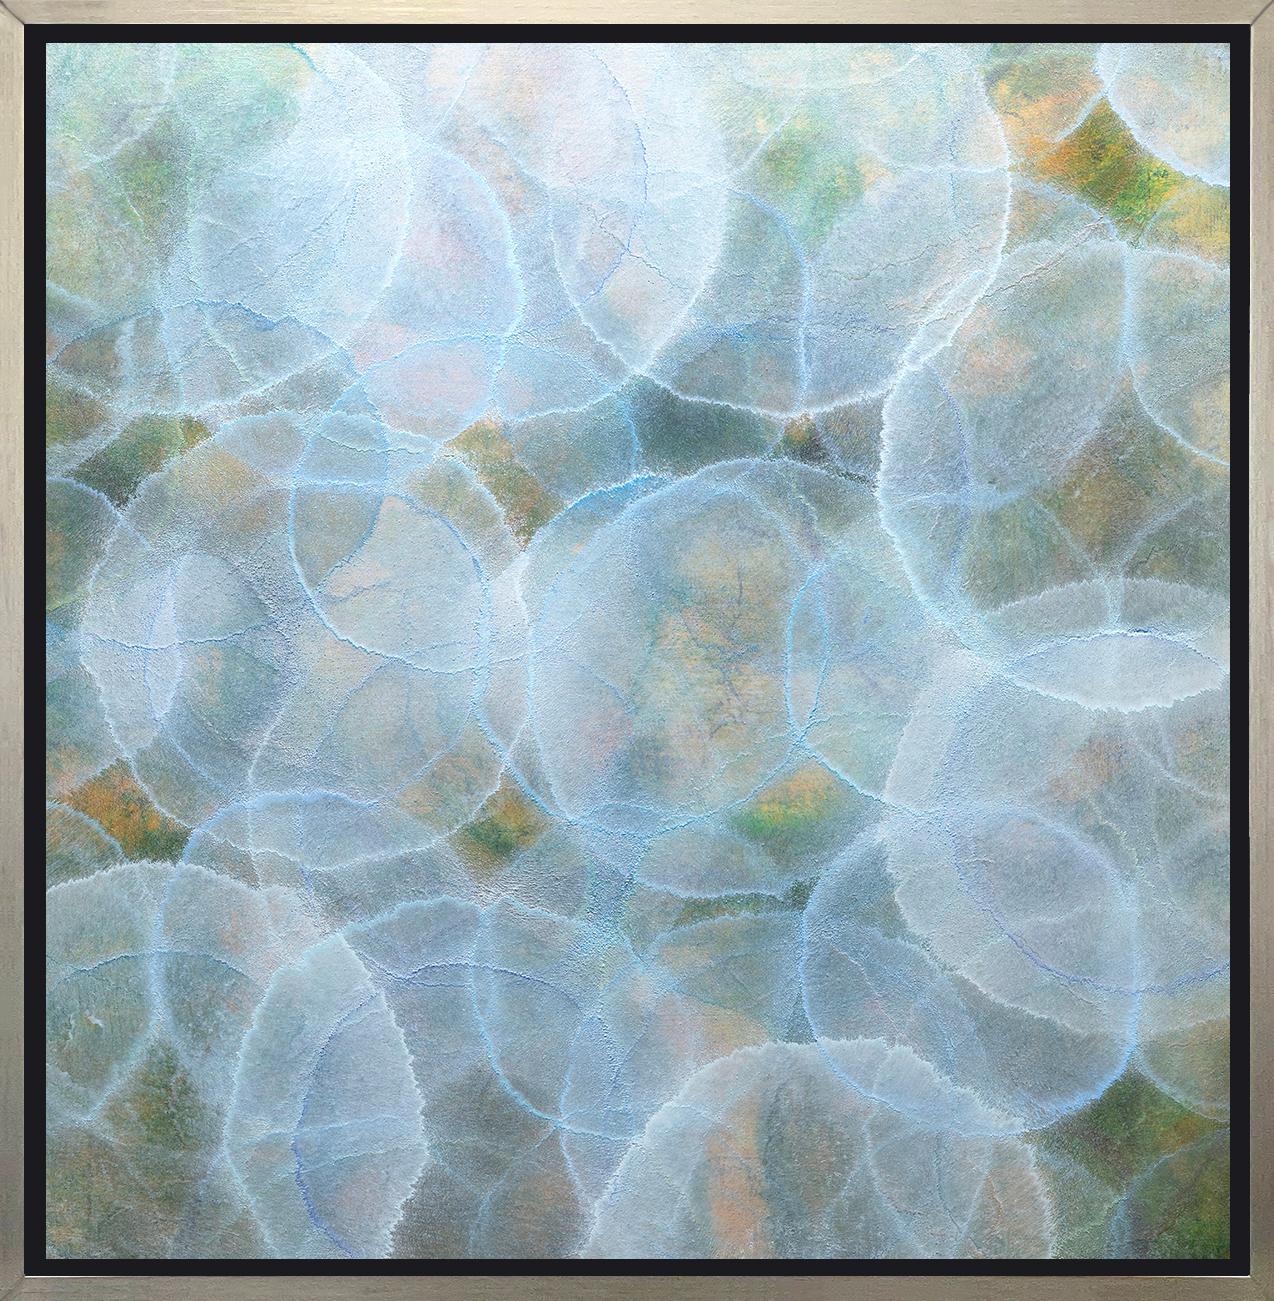 Roger Mudre Abstract Print - "Staphisagria, " Framed Limited Edition Giclee Print, 48" x 48"